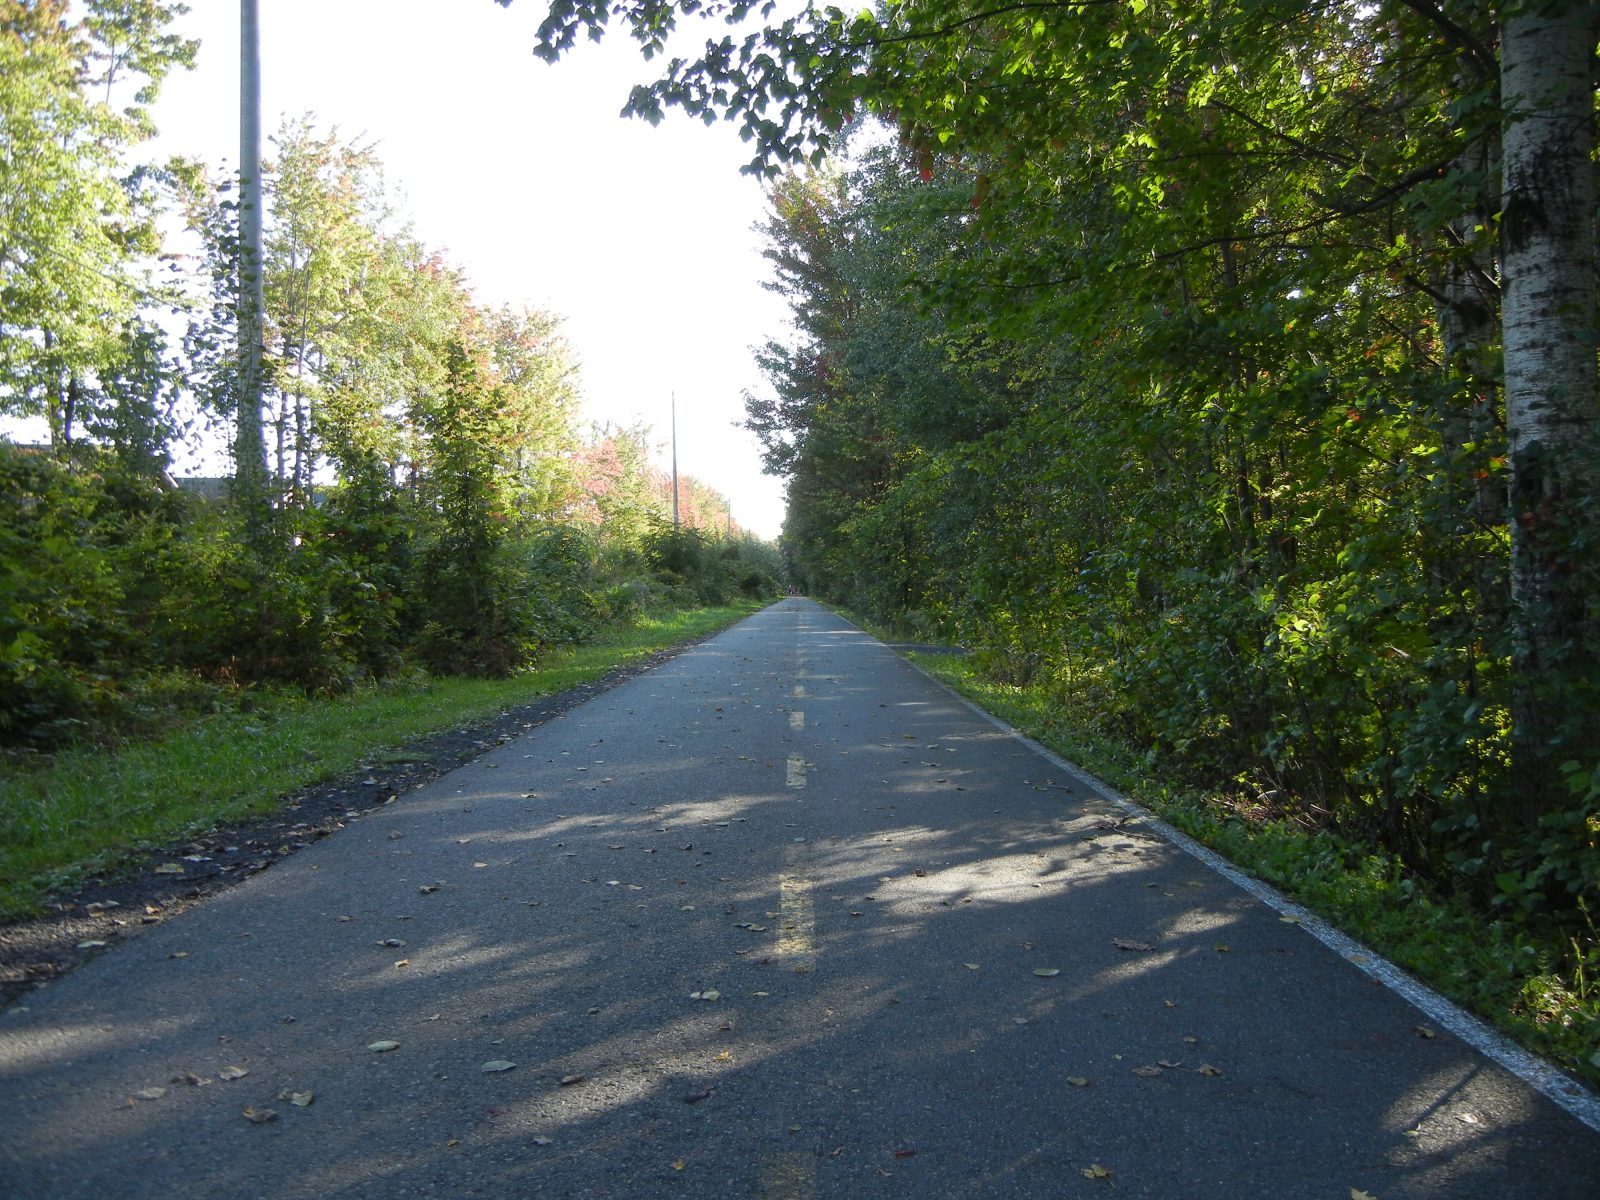 UCPR confirms financial support of recreational trail